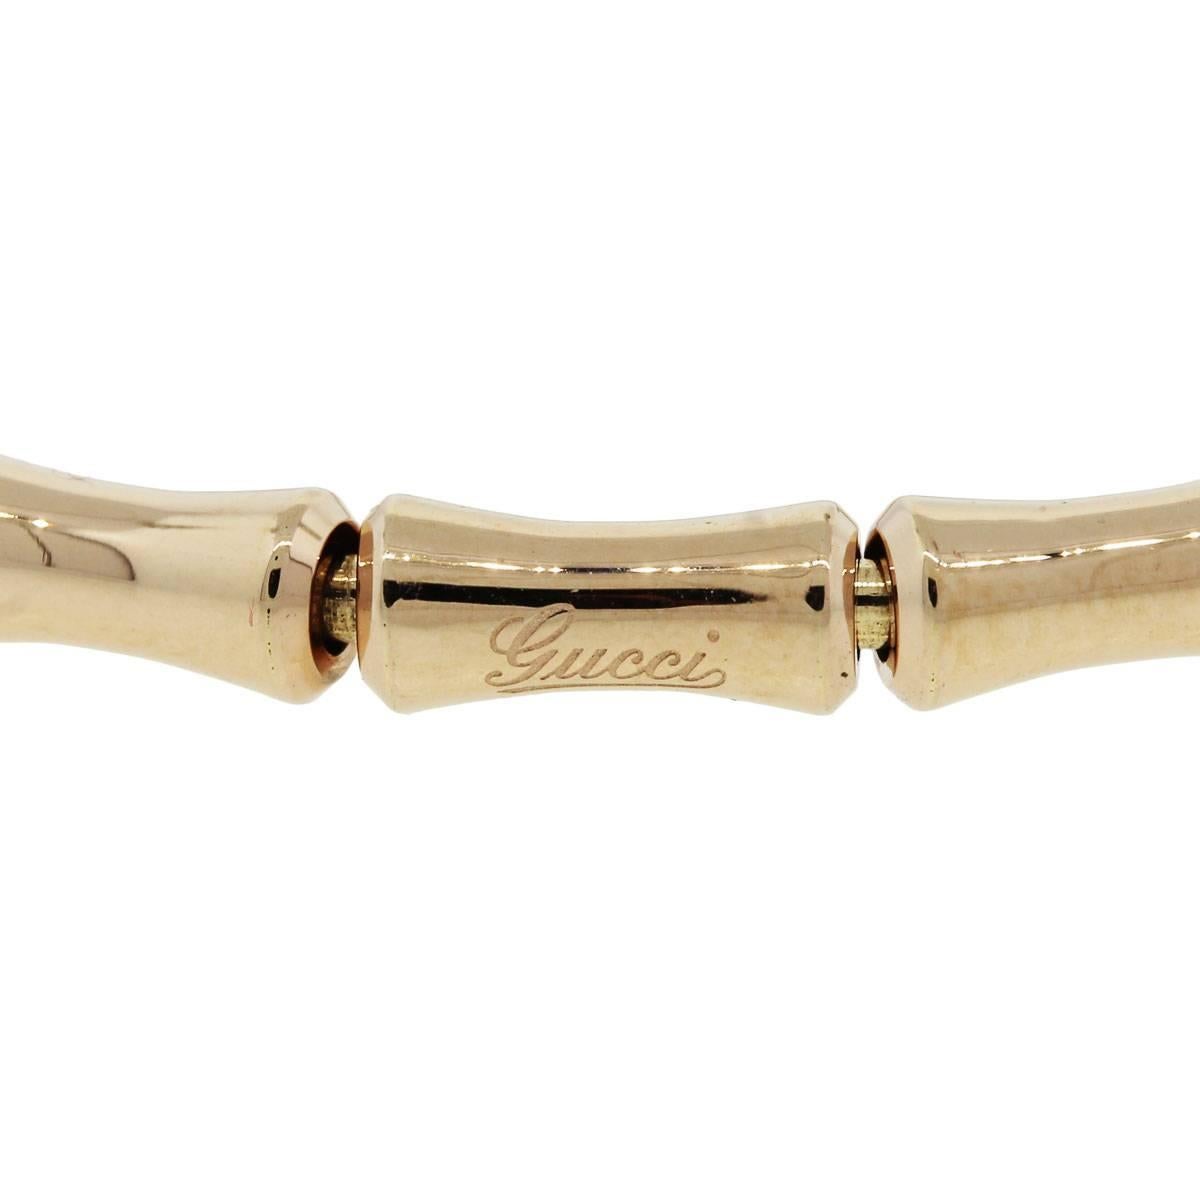 Designer: Gucci
Material: 18k rose gold
Clasp: No clasp, bracelet stretches
Total Weight: 8.8g (5.7dwt)
Measurements: This bracelet will fit up to a 7″ wrist
Additional Details: This item comes with a presentation box!
SKU: G6843